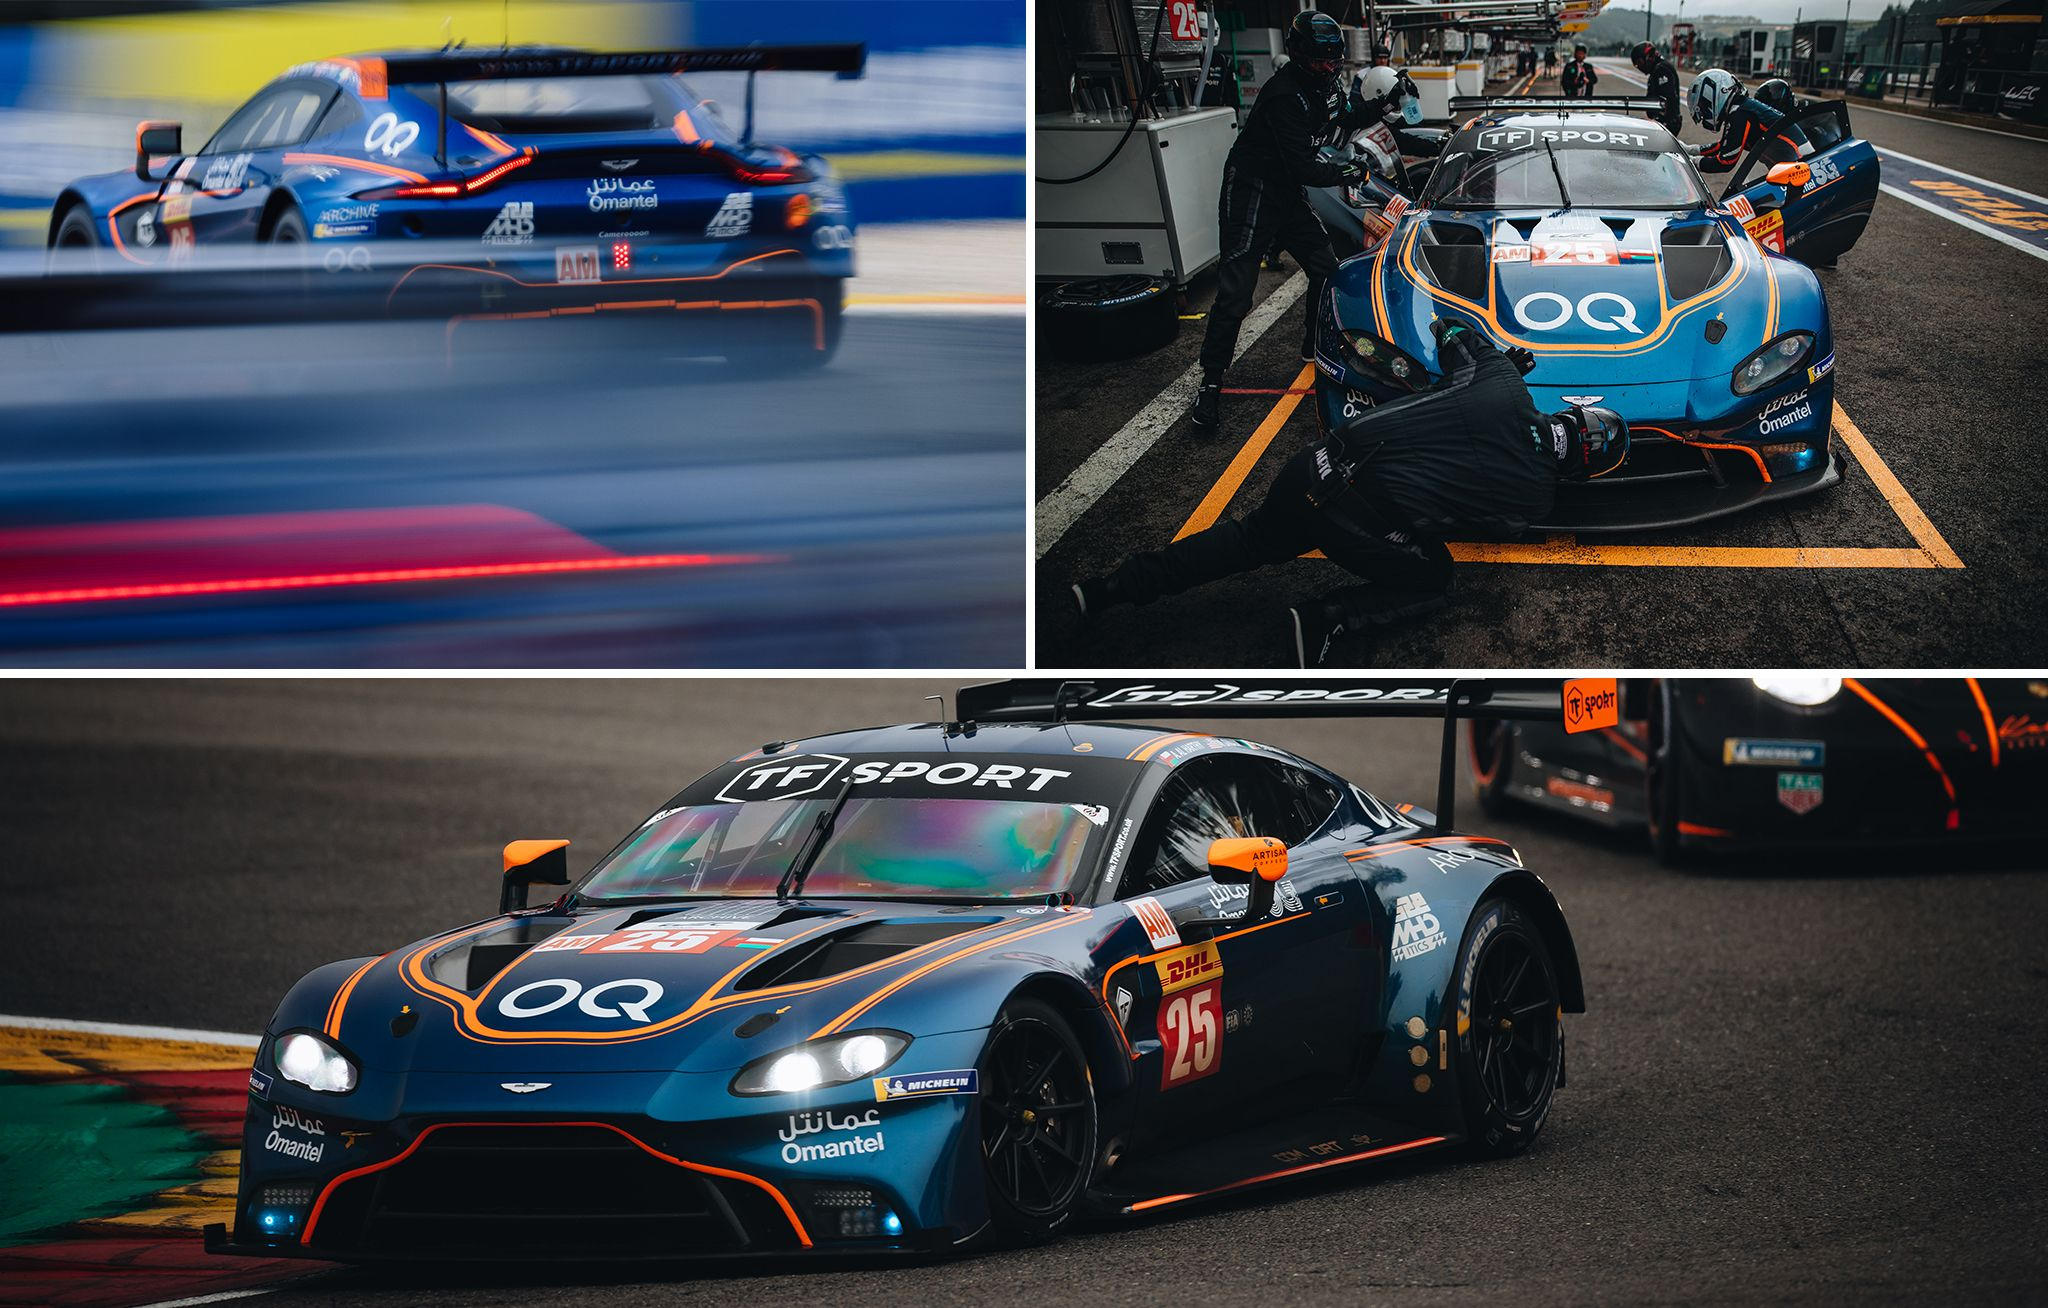 Vantage back on FIA World Endurance Championship podium as ORT by TF makes history at 6 Hours of Spa (2)